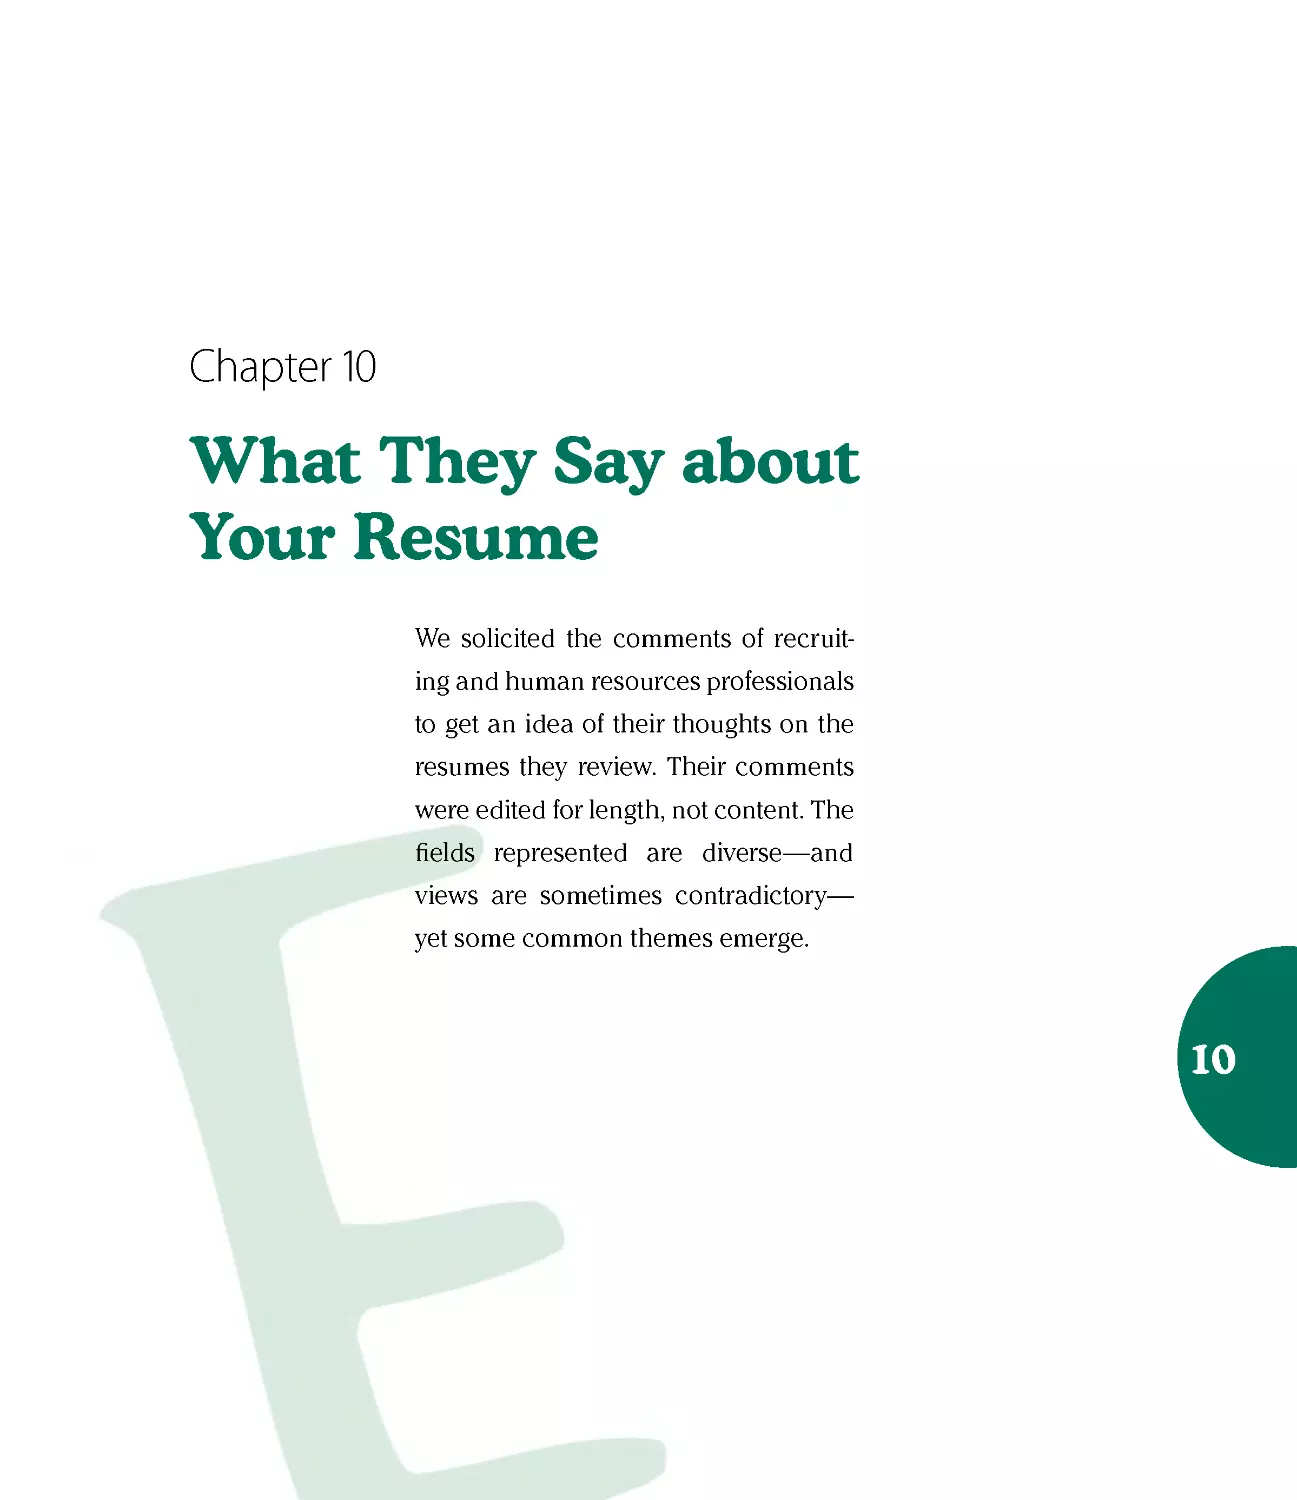 Chapter 10: What They Say about Your Resume